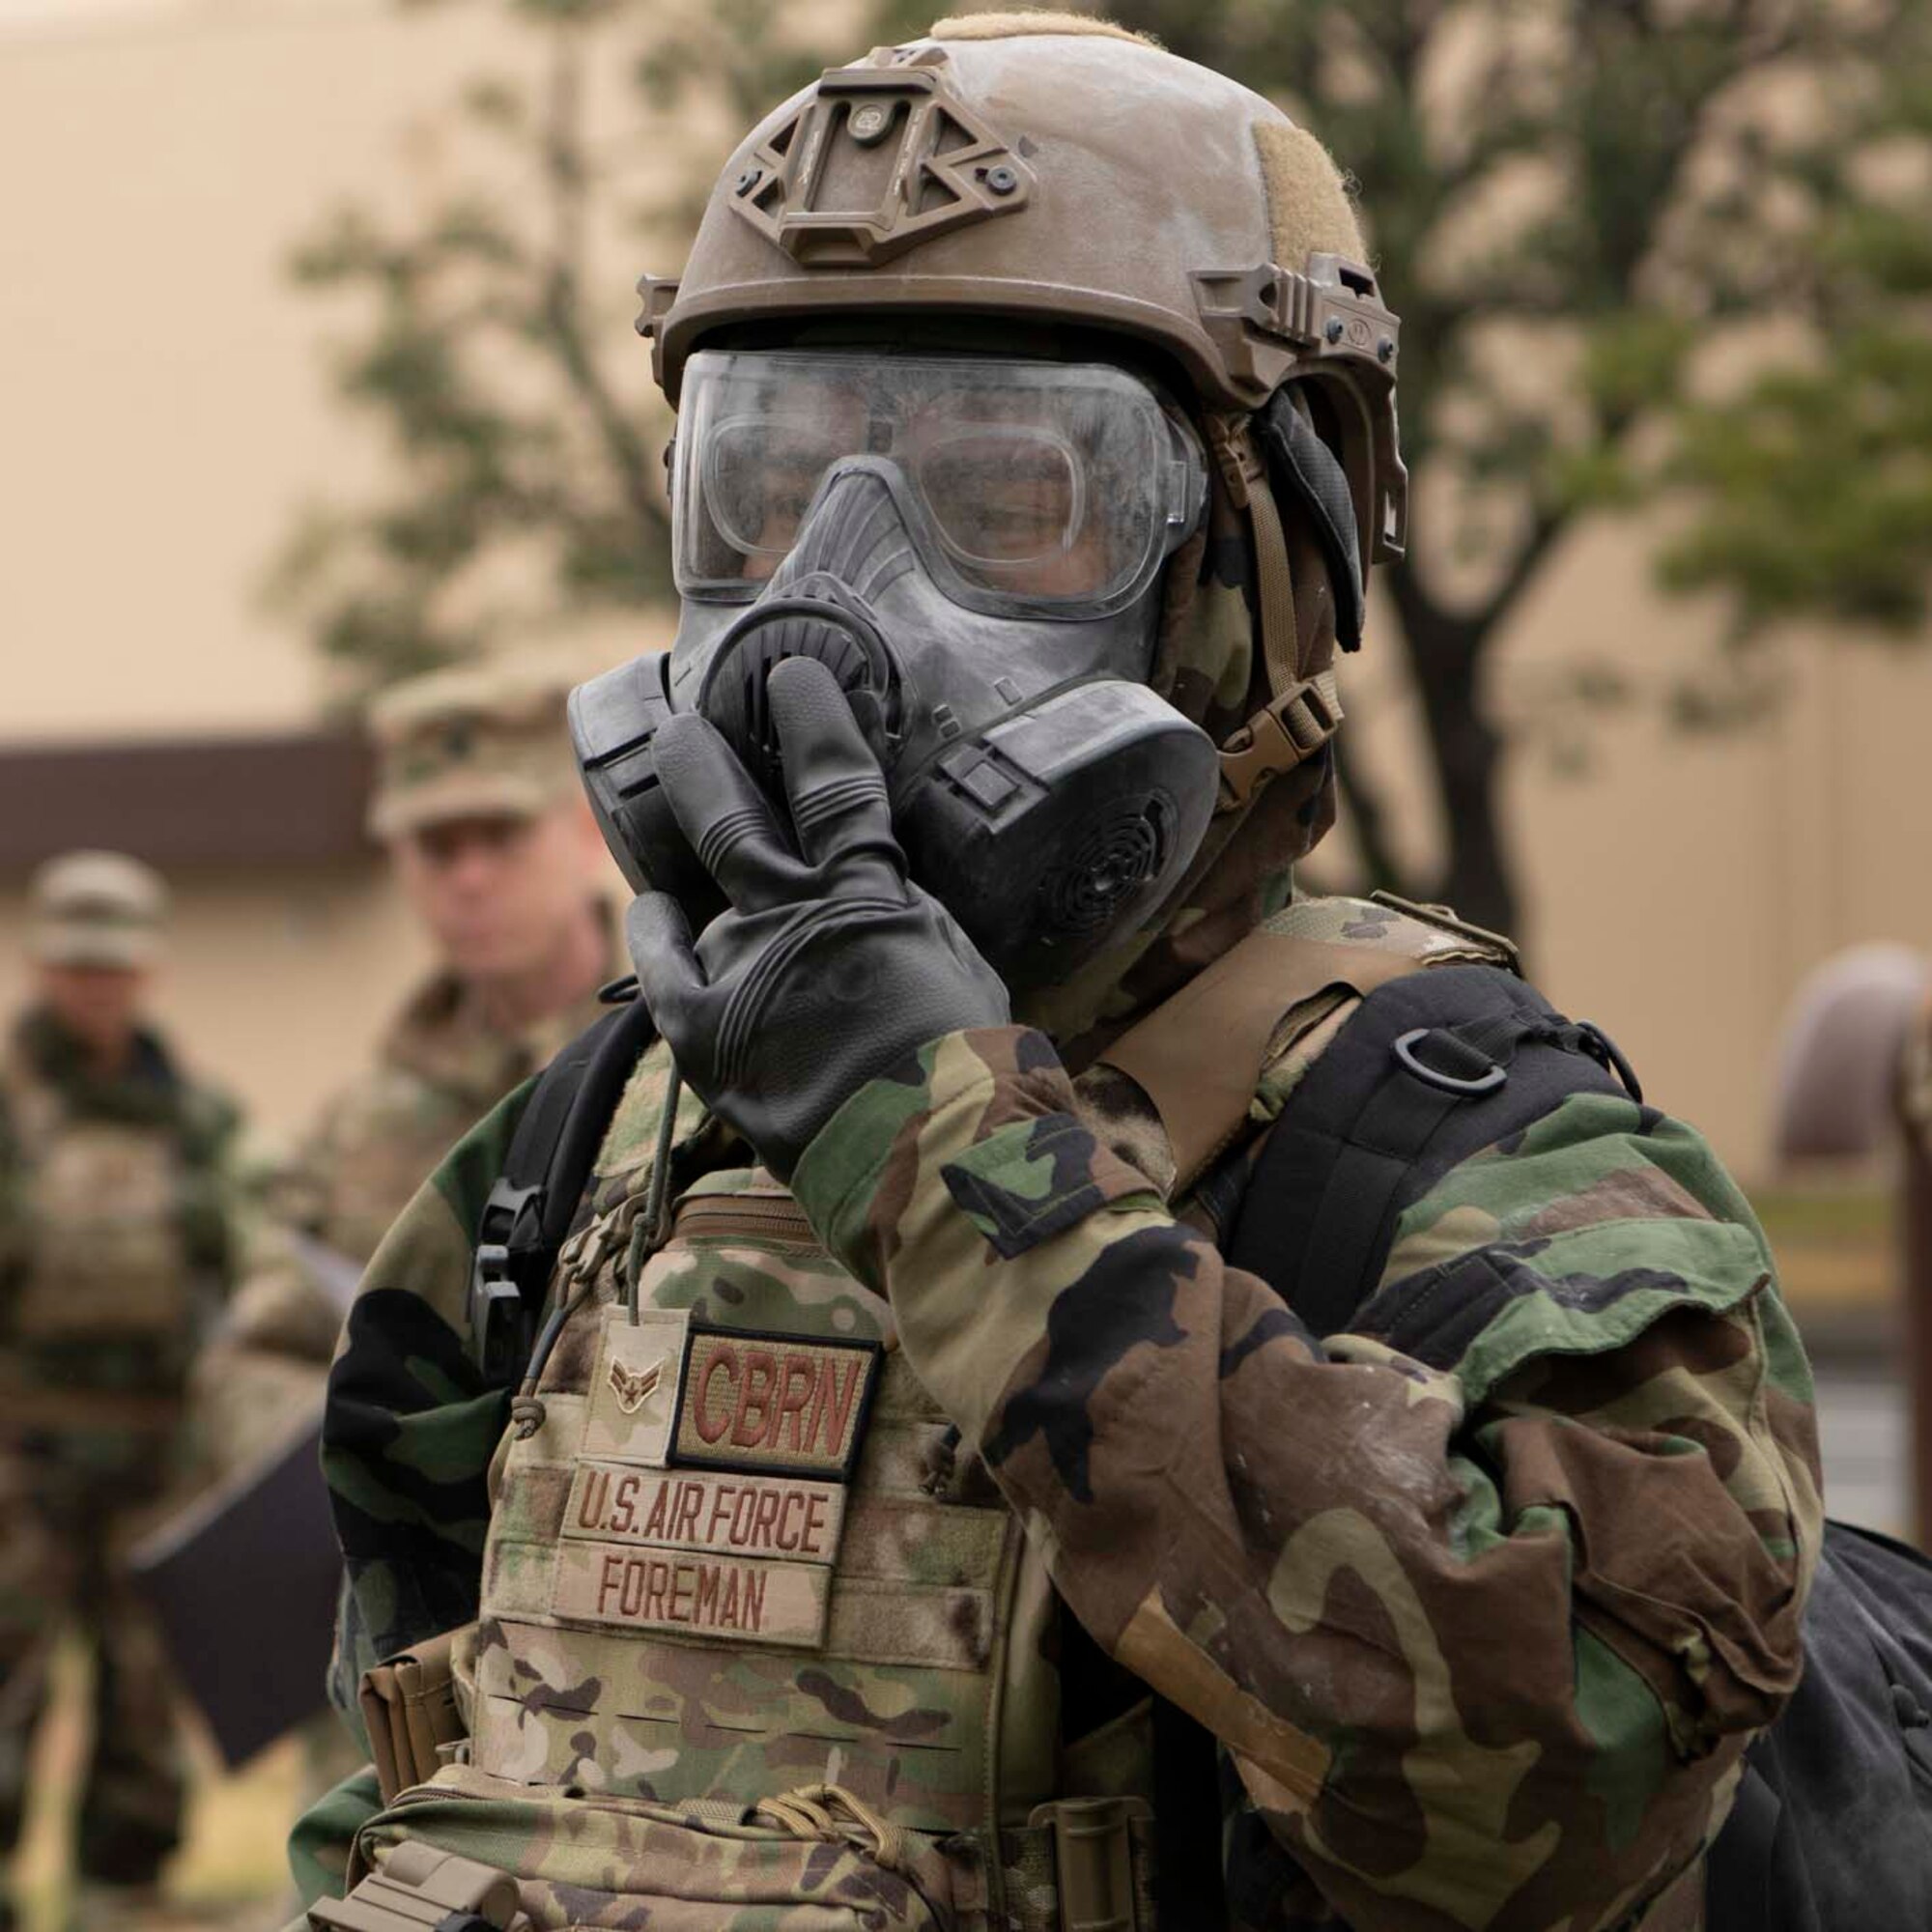 A U.S. miltary member wearing MOPP gears holds on to the front of his mask.